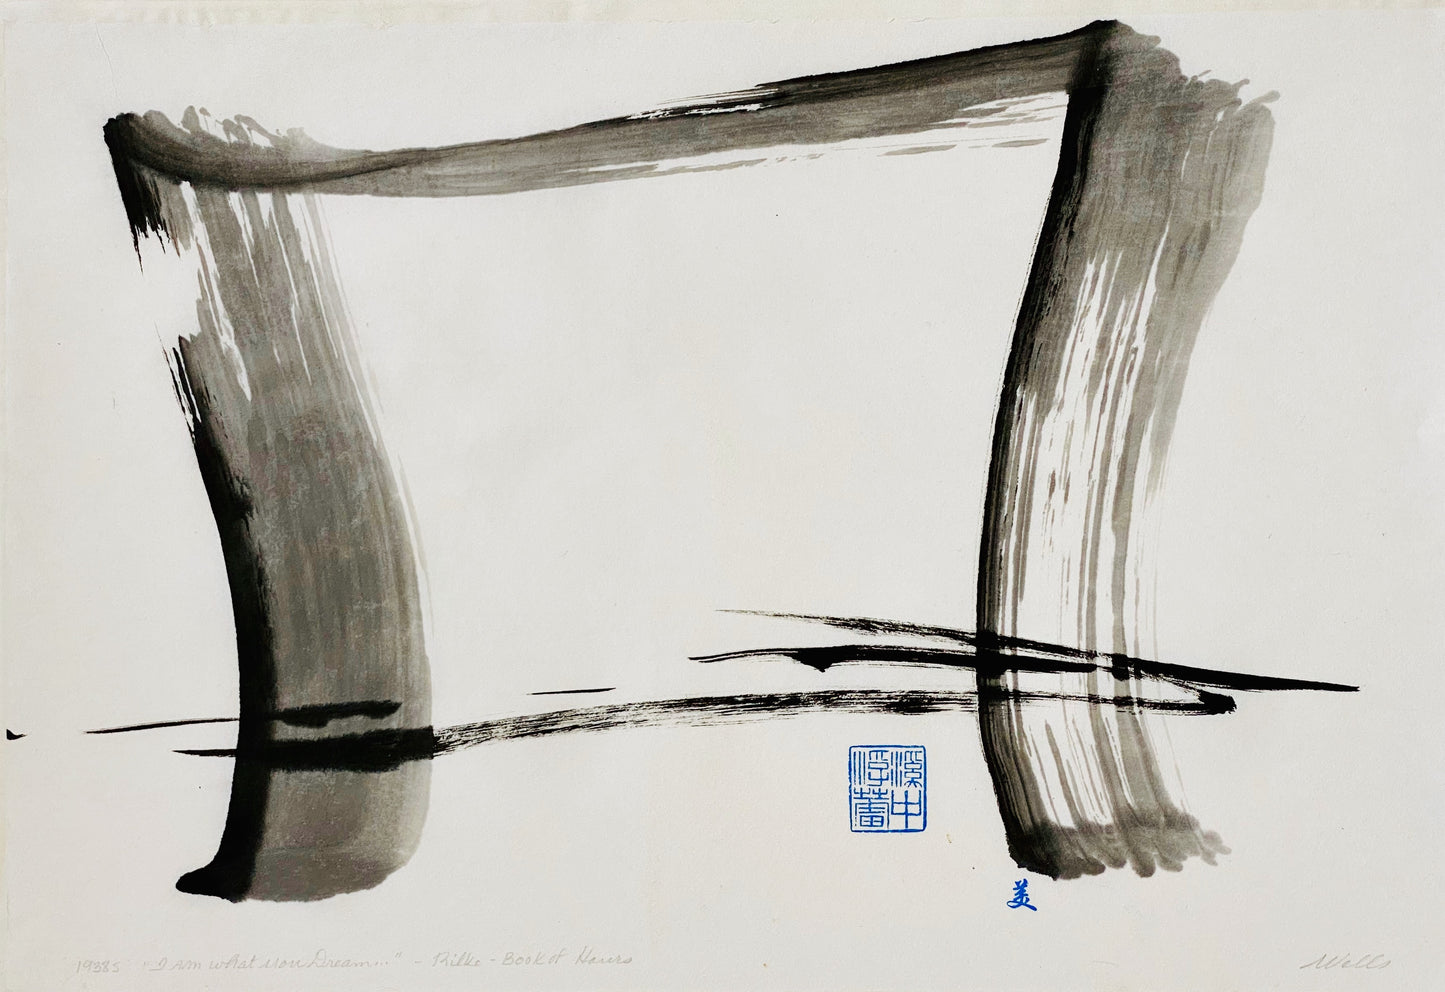 Abstract sumi e by Marilyn Wells, "I Am What You Dream" 1938S